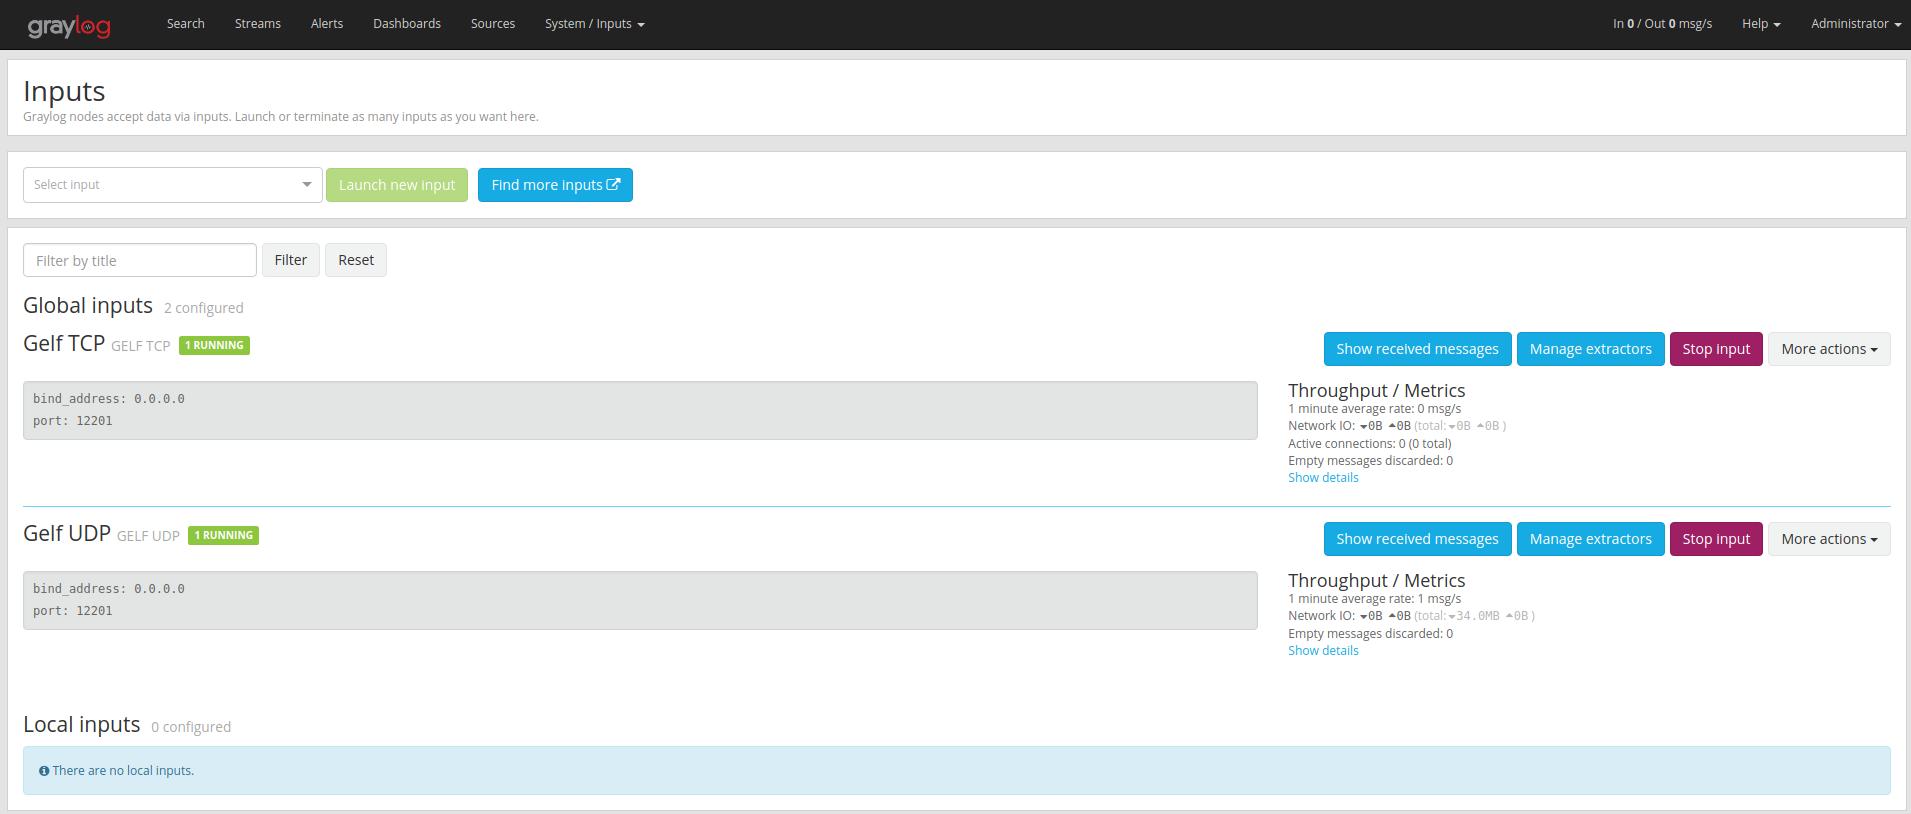 images/download/attachments/75831444/graylog-inputs.png